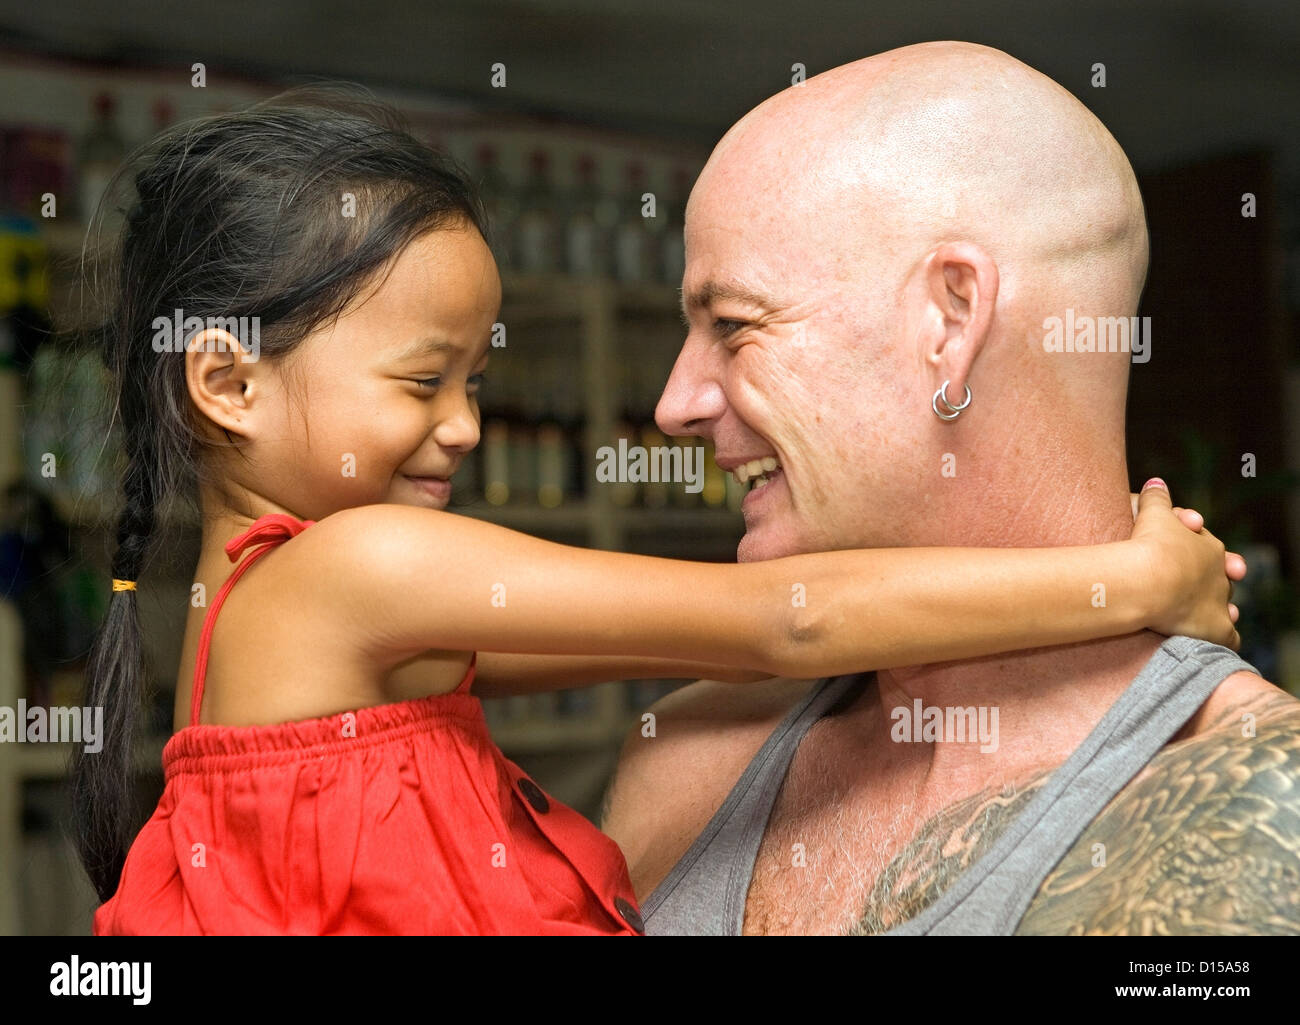 Caucasian man and beautiful, young Filipino girl hugging and smiling at each other. Stock Photo